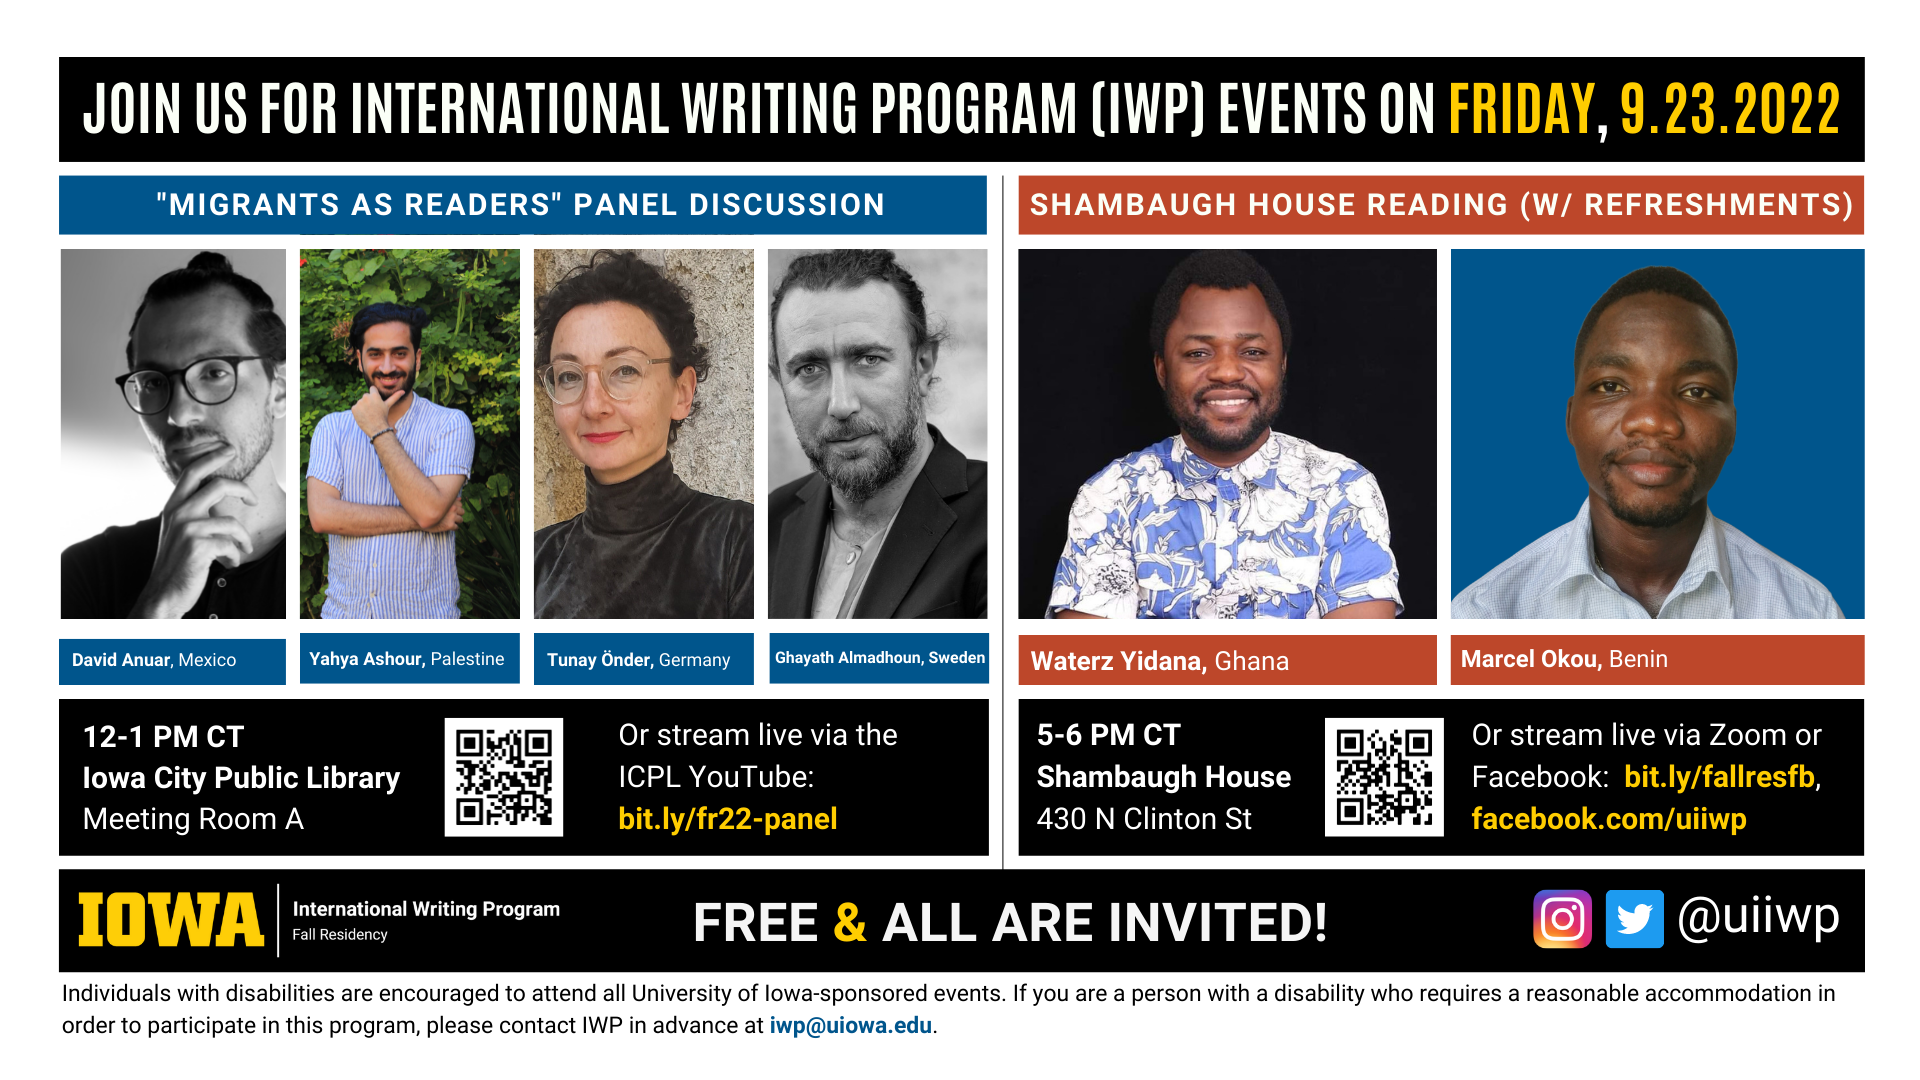 An image with two halves, each advertising one event. The image as a whole is labeled “Join us for International Writing Program (IWP) events on Friday, 9.23.2022.” The left half of the image is labeled, “’Migrants as Readers’ Panel Discussion.” There are portraits of four writers (named below) and the following text: "David Anuar, Mexico. Yahya Ashour, Palestine. TUnay Onder, Germany. Ghayath Almadhoun, Sweden. 12-1 PM CT, Iowa City Public Library, Meeting Room A. Or stream live via the ICPL YouTube: bit.ly/fr22-panel." The right half of the image is labeled “Shambaugh House Reading (W/ Refreshments.)” It features portraits of two writers (named below) and the following text: "Waterz Yidana, Ghana. Marcel Okou, Benin. 5-6 PM CT, Shambaugh House, 430 N. Clinton St. Or stream live via Zoom or Facebook:  bit.ly/fallresfb, facebook.com/uiiwp.” Below that text there are the IWP Fall Residency logo, the Instagram and Twitter handle @uiiwp, and a note that the event is “Free & All Are Invited.” The following text is at the bottom of the image: "Individuals with disabilities are encouraged to attend all University of Iowa-sponsored events. If you are a person with a disability who requires a reasonable accommodation in order to participate in this program, please contact IWP in advance at iwp@uiowa.edu.”